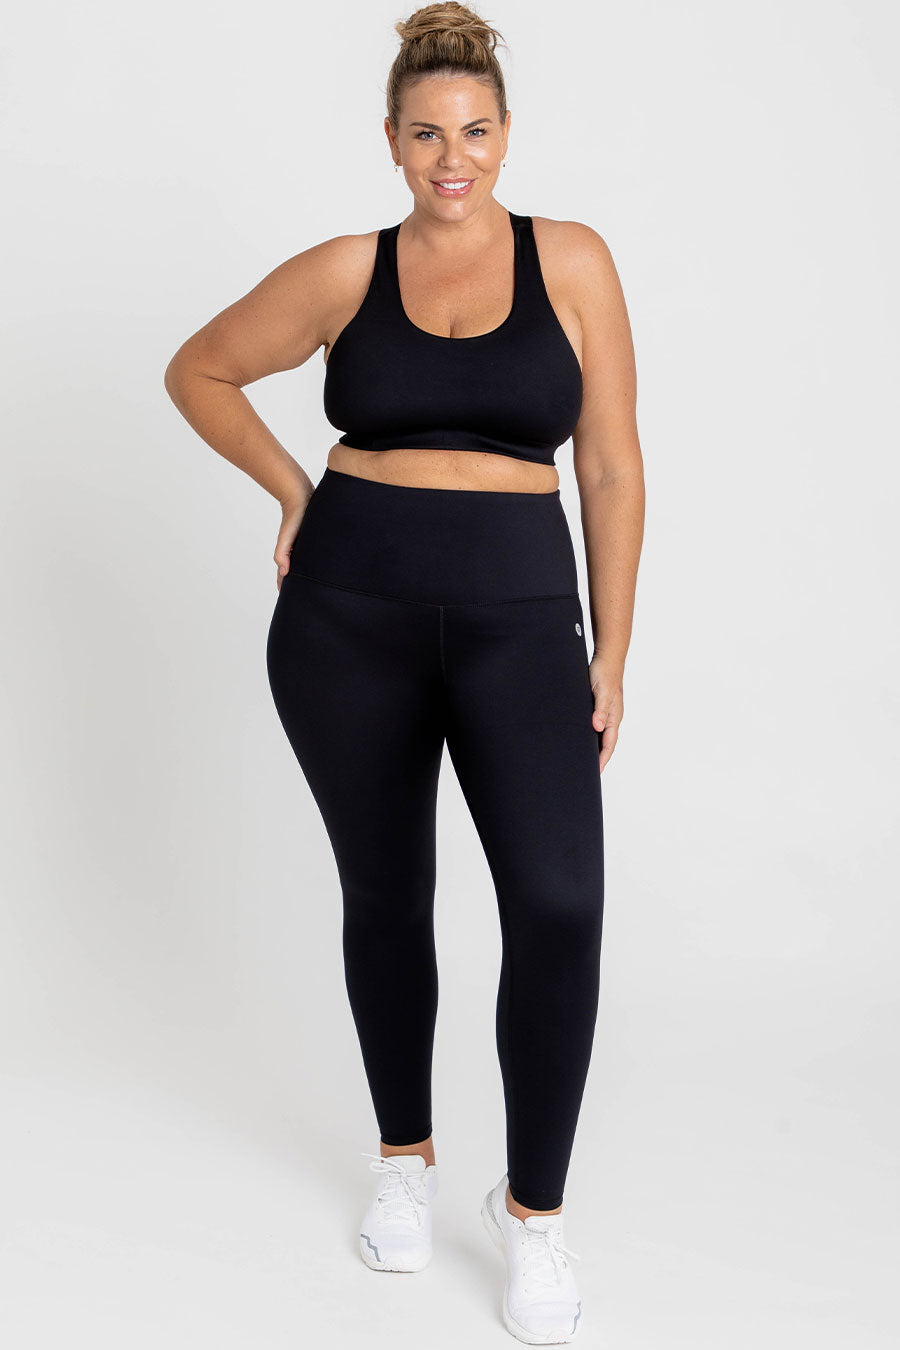 Essential Full Length Tight - Black from Active Truth™
